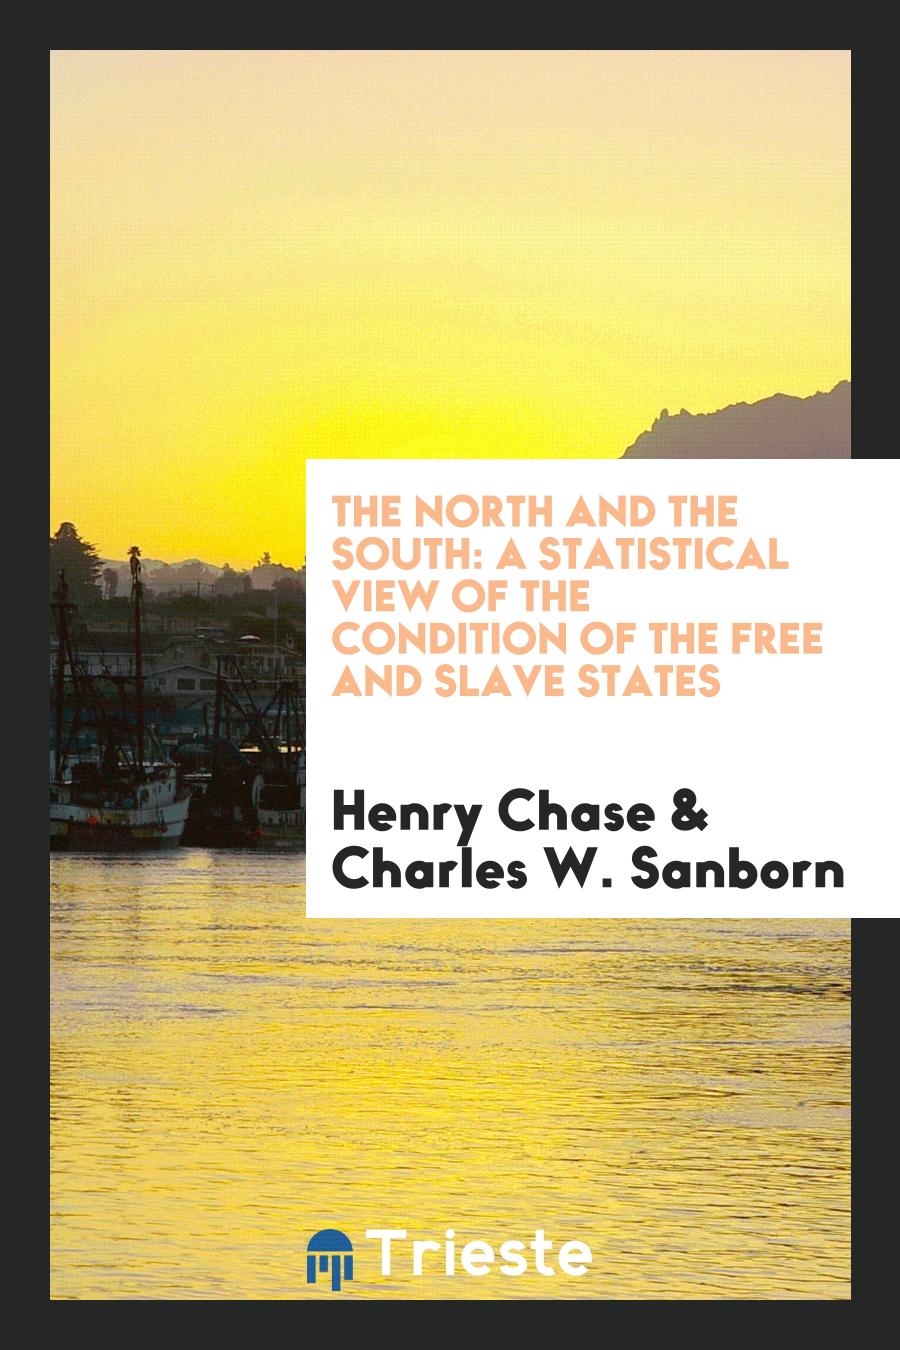 The North and the South: A Statistical View of the Condition of the Free and Slave States